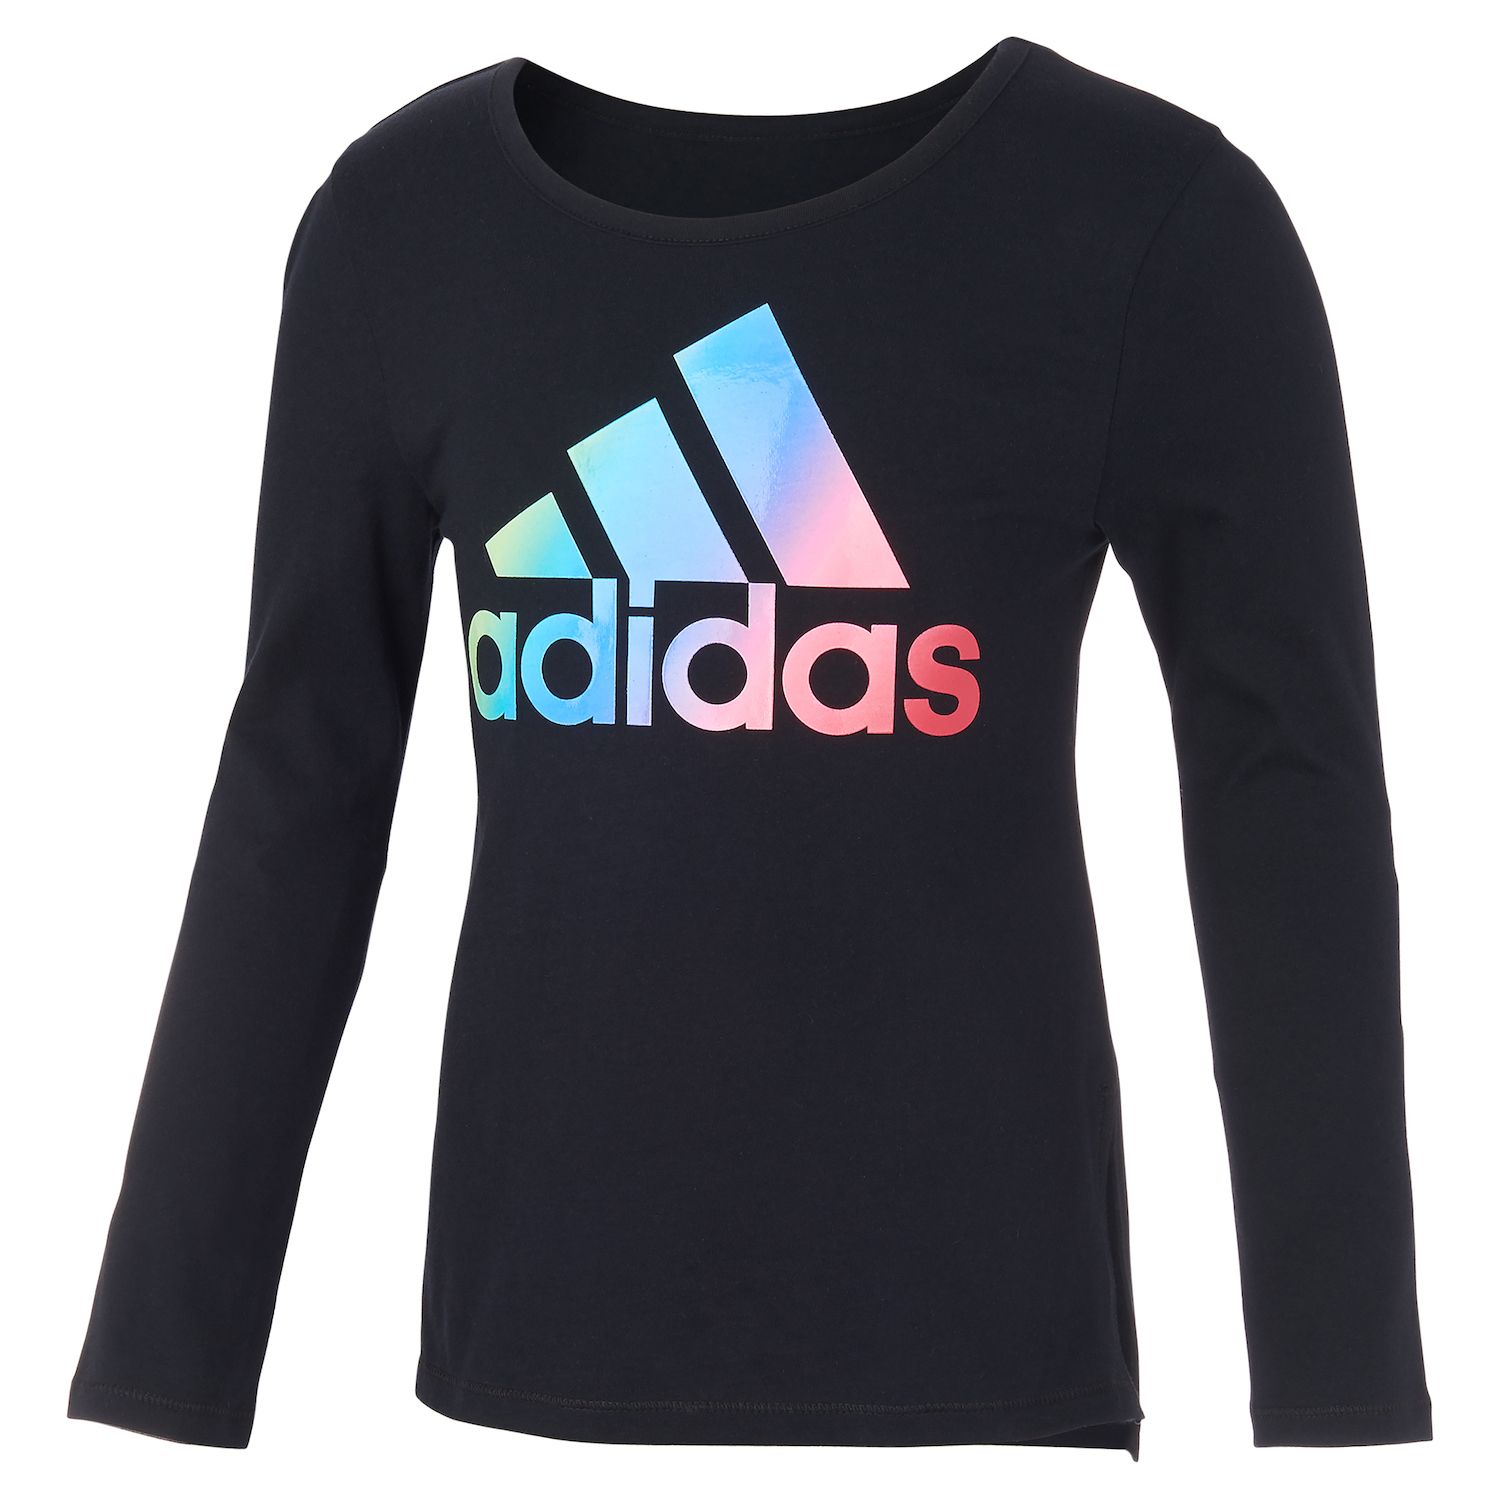 adidas youth girl clothes